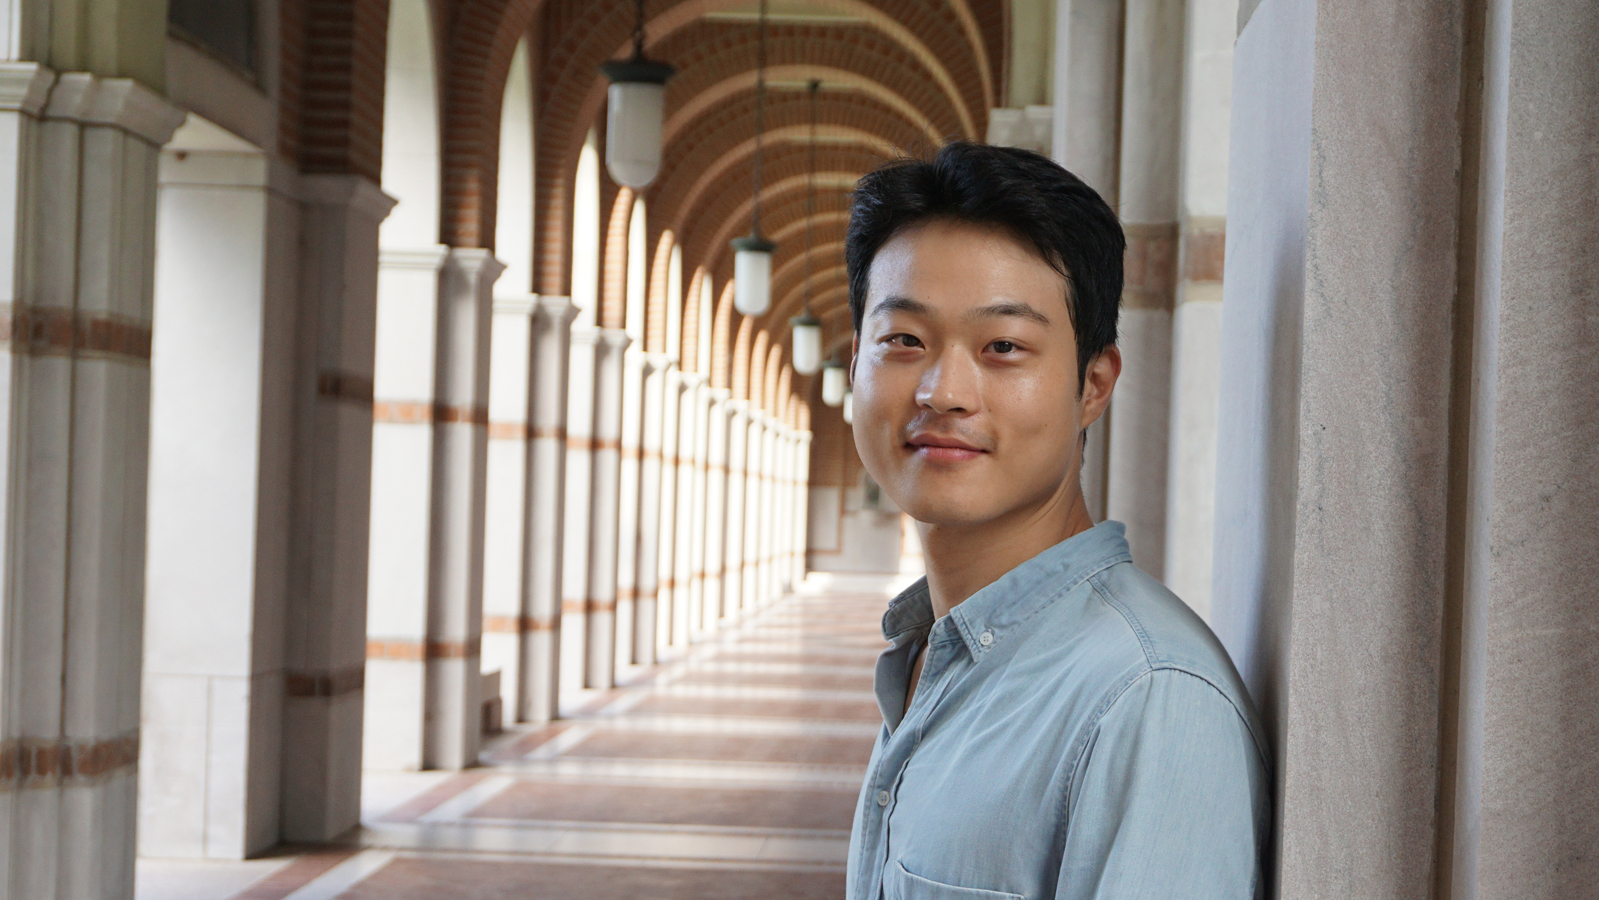 Rice CS Ph.D. candidate Lyle Kim matriculated in 2019.